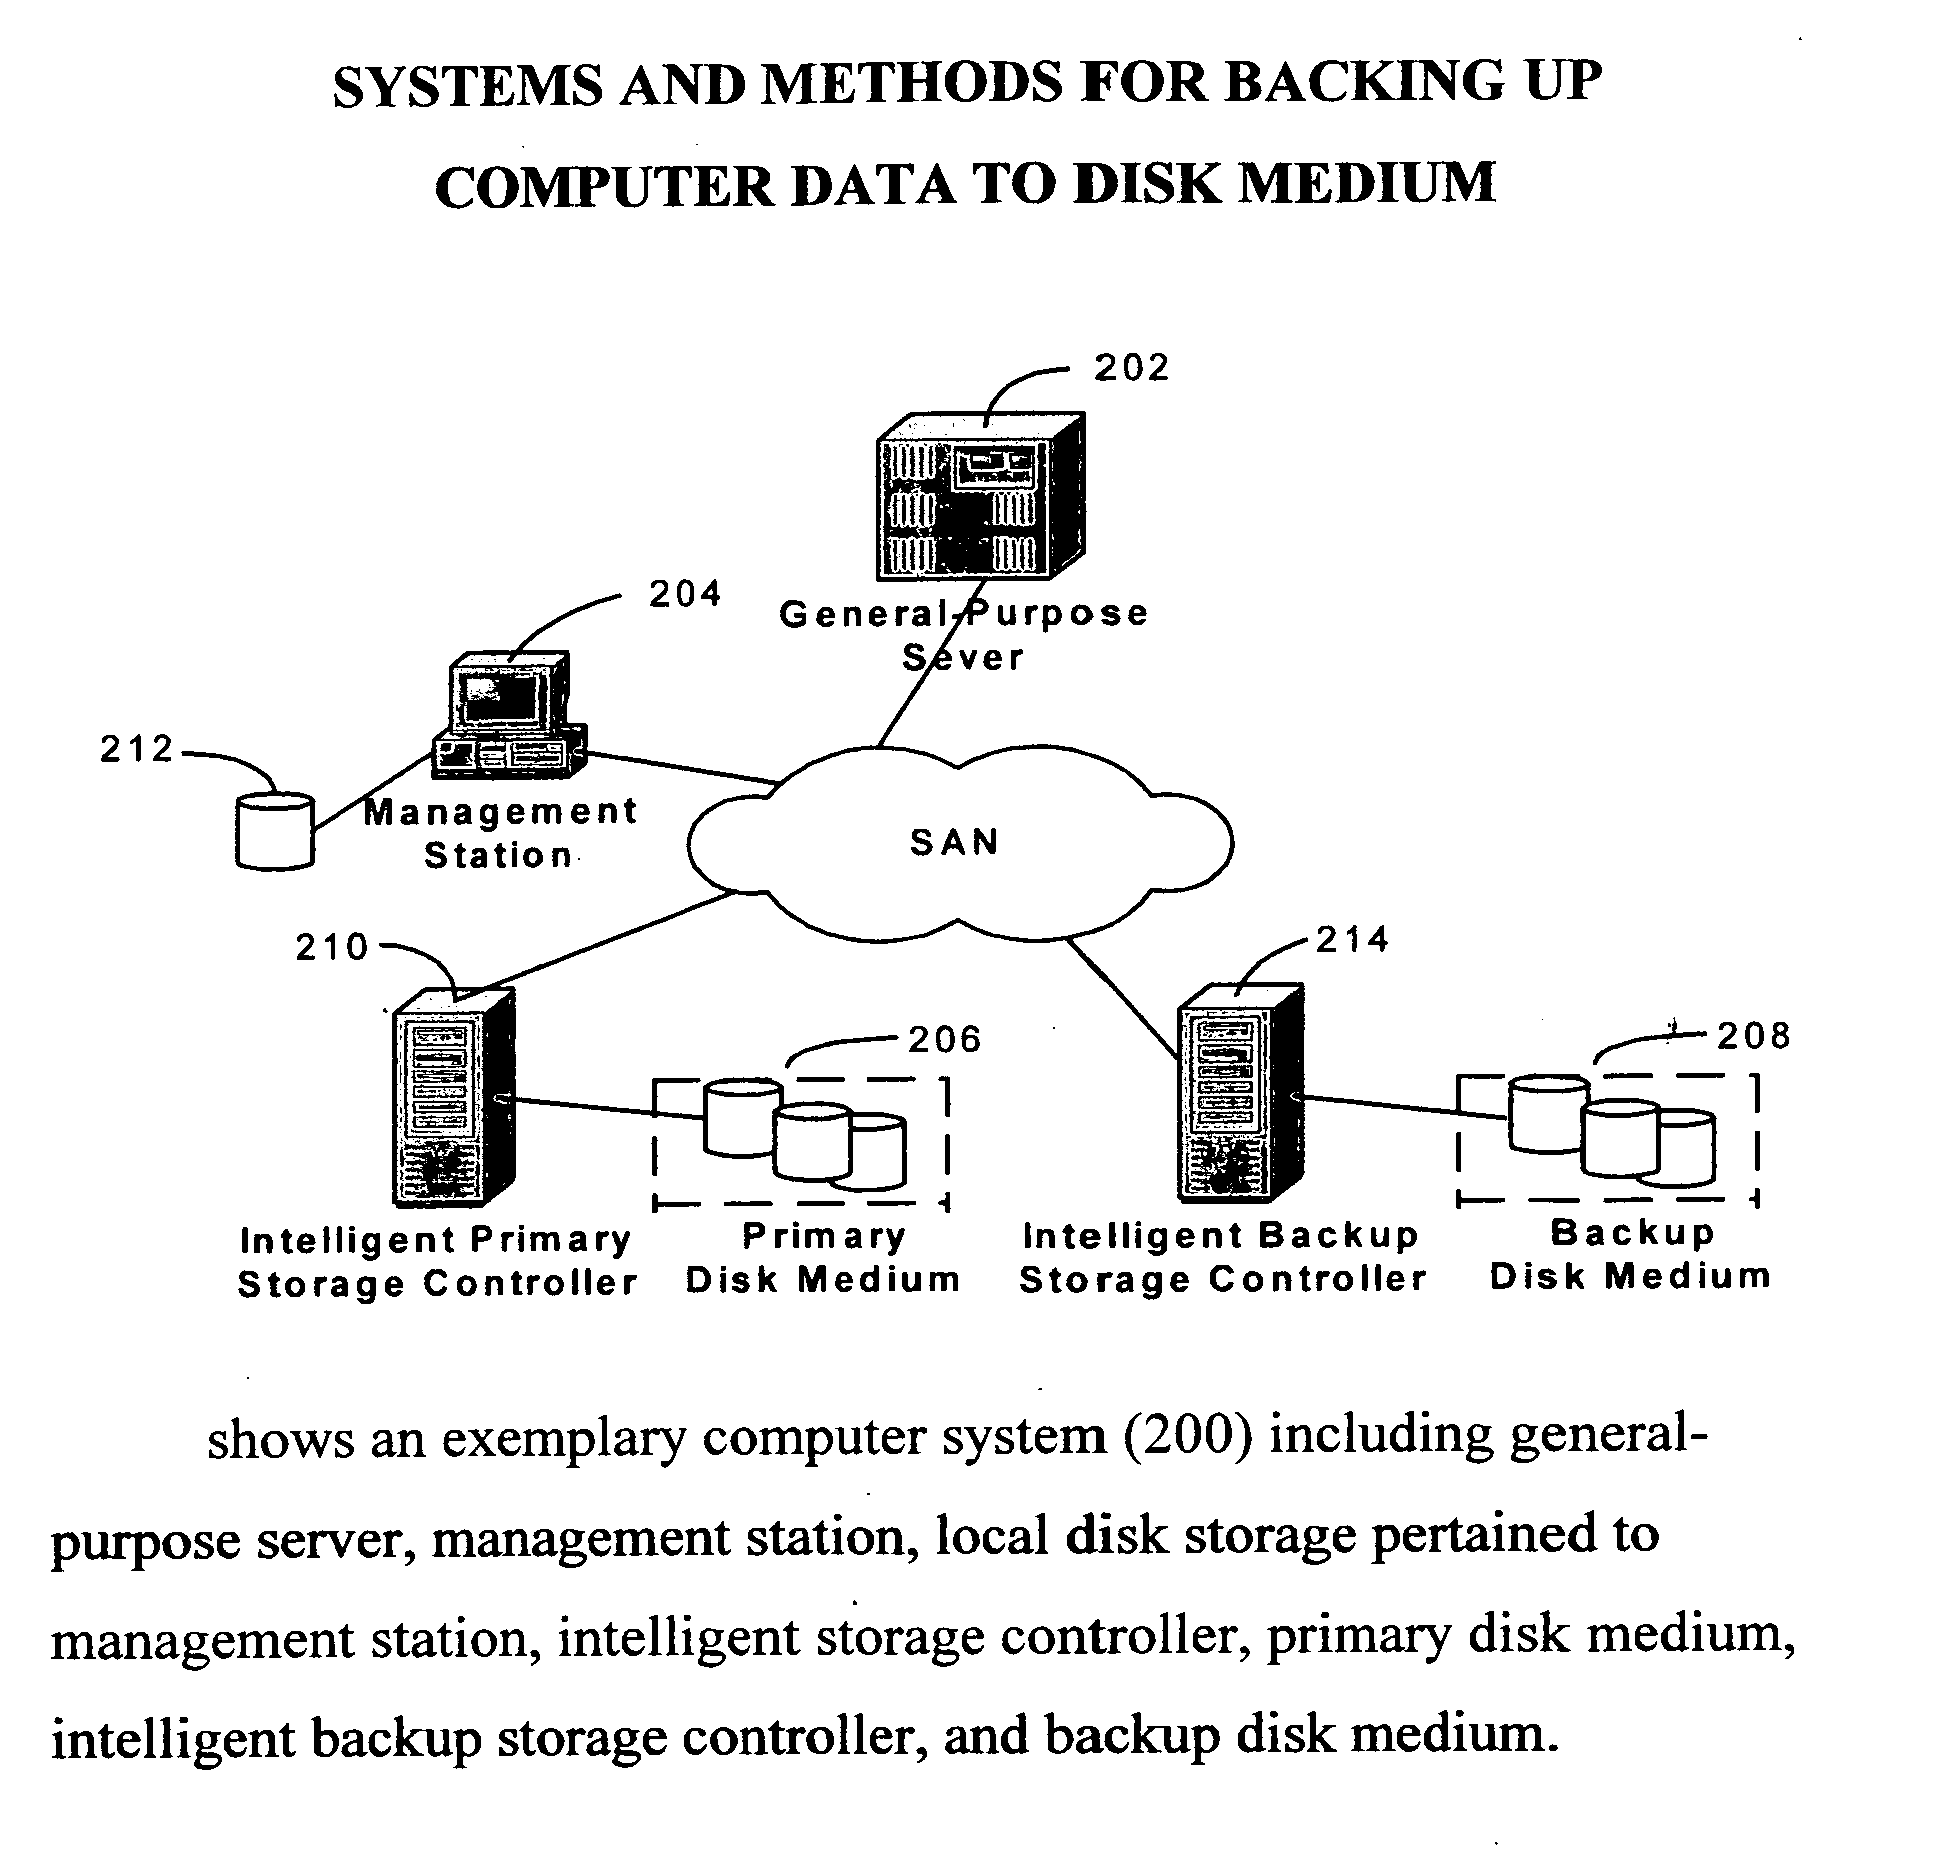 Systems and methods for backing up computer data to disk medium